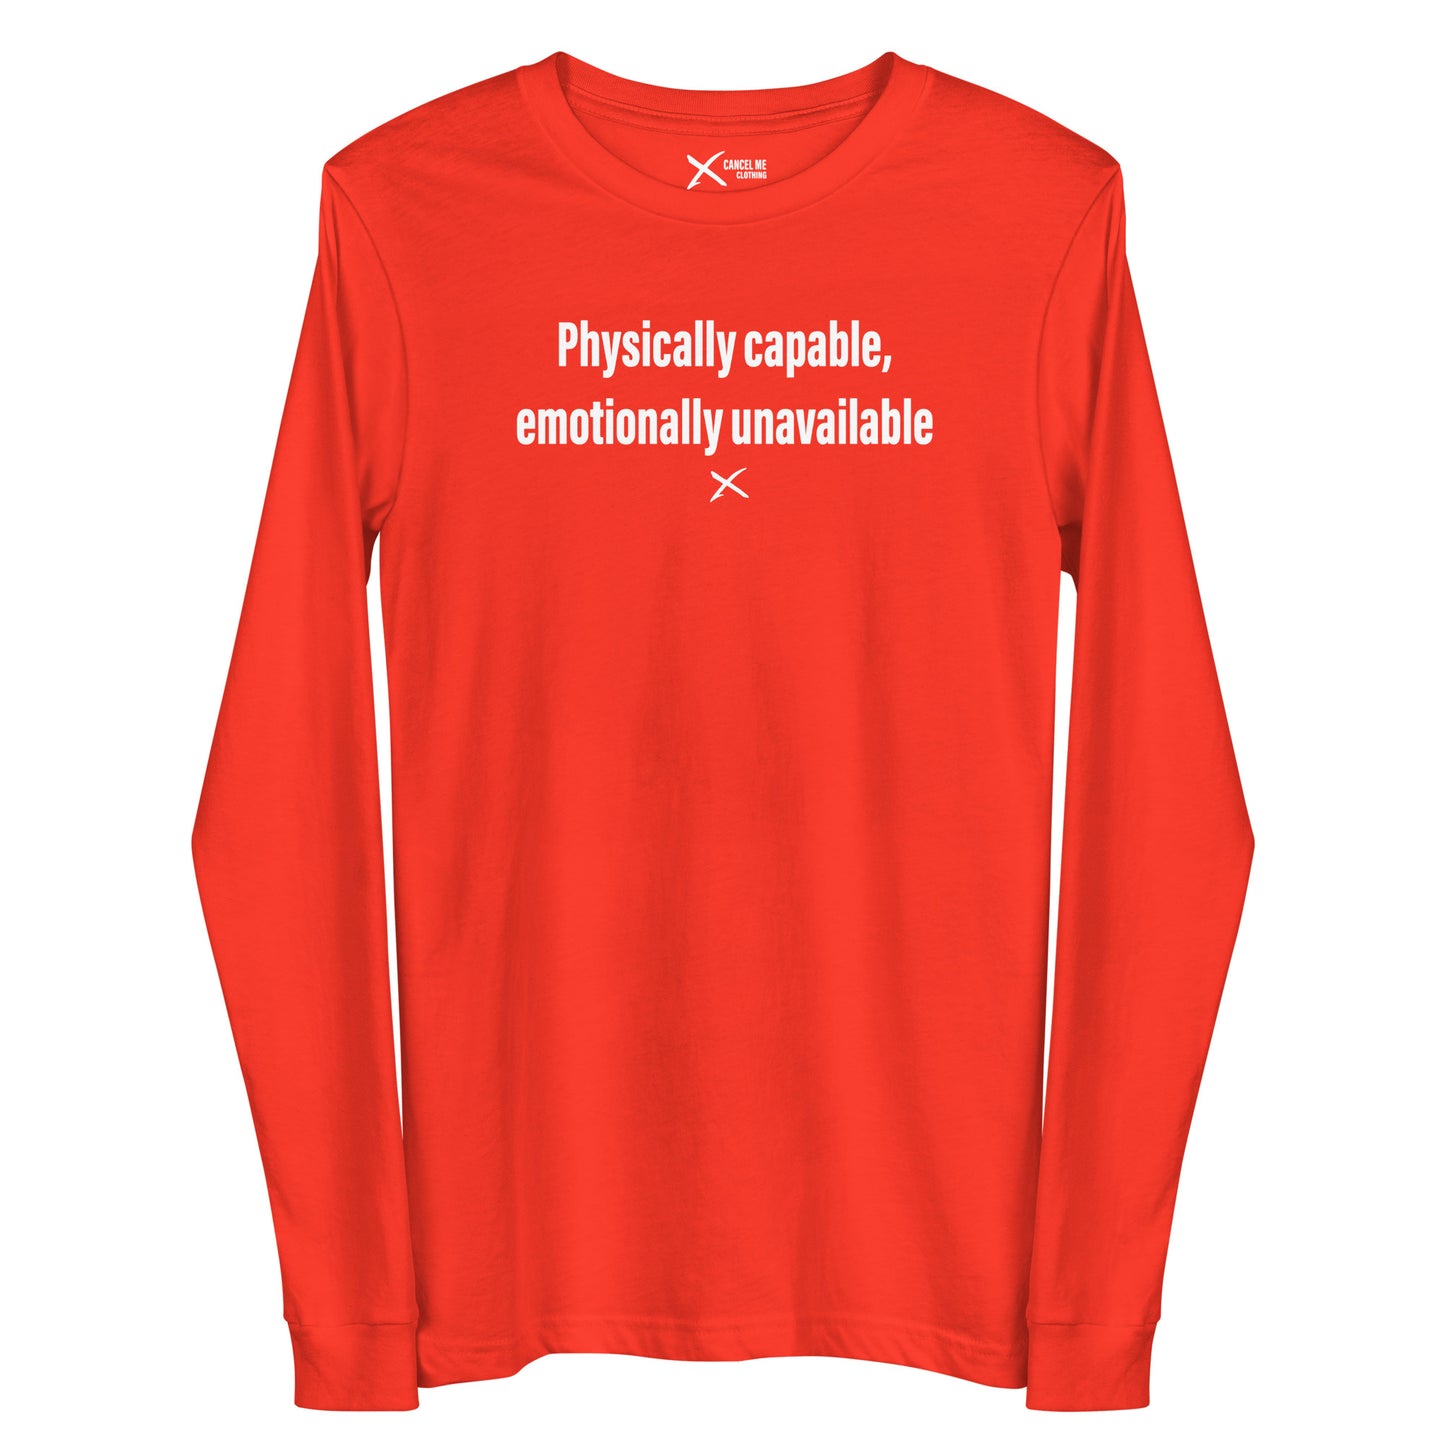 Physically capable, emotionally unavailable - Longsleeve